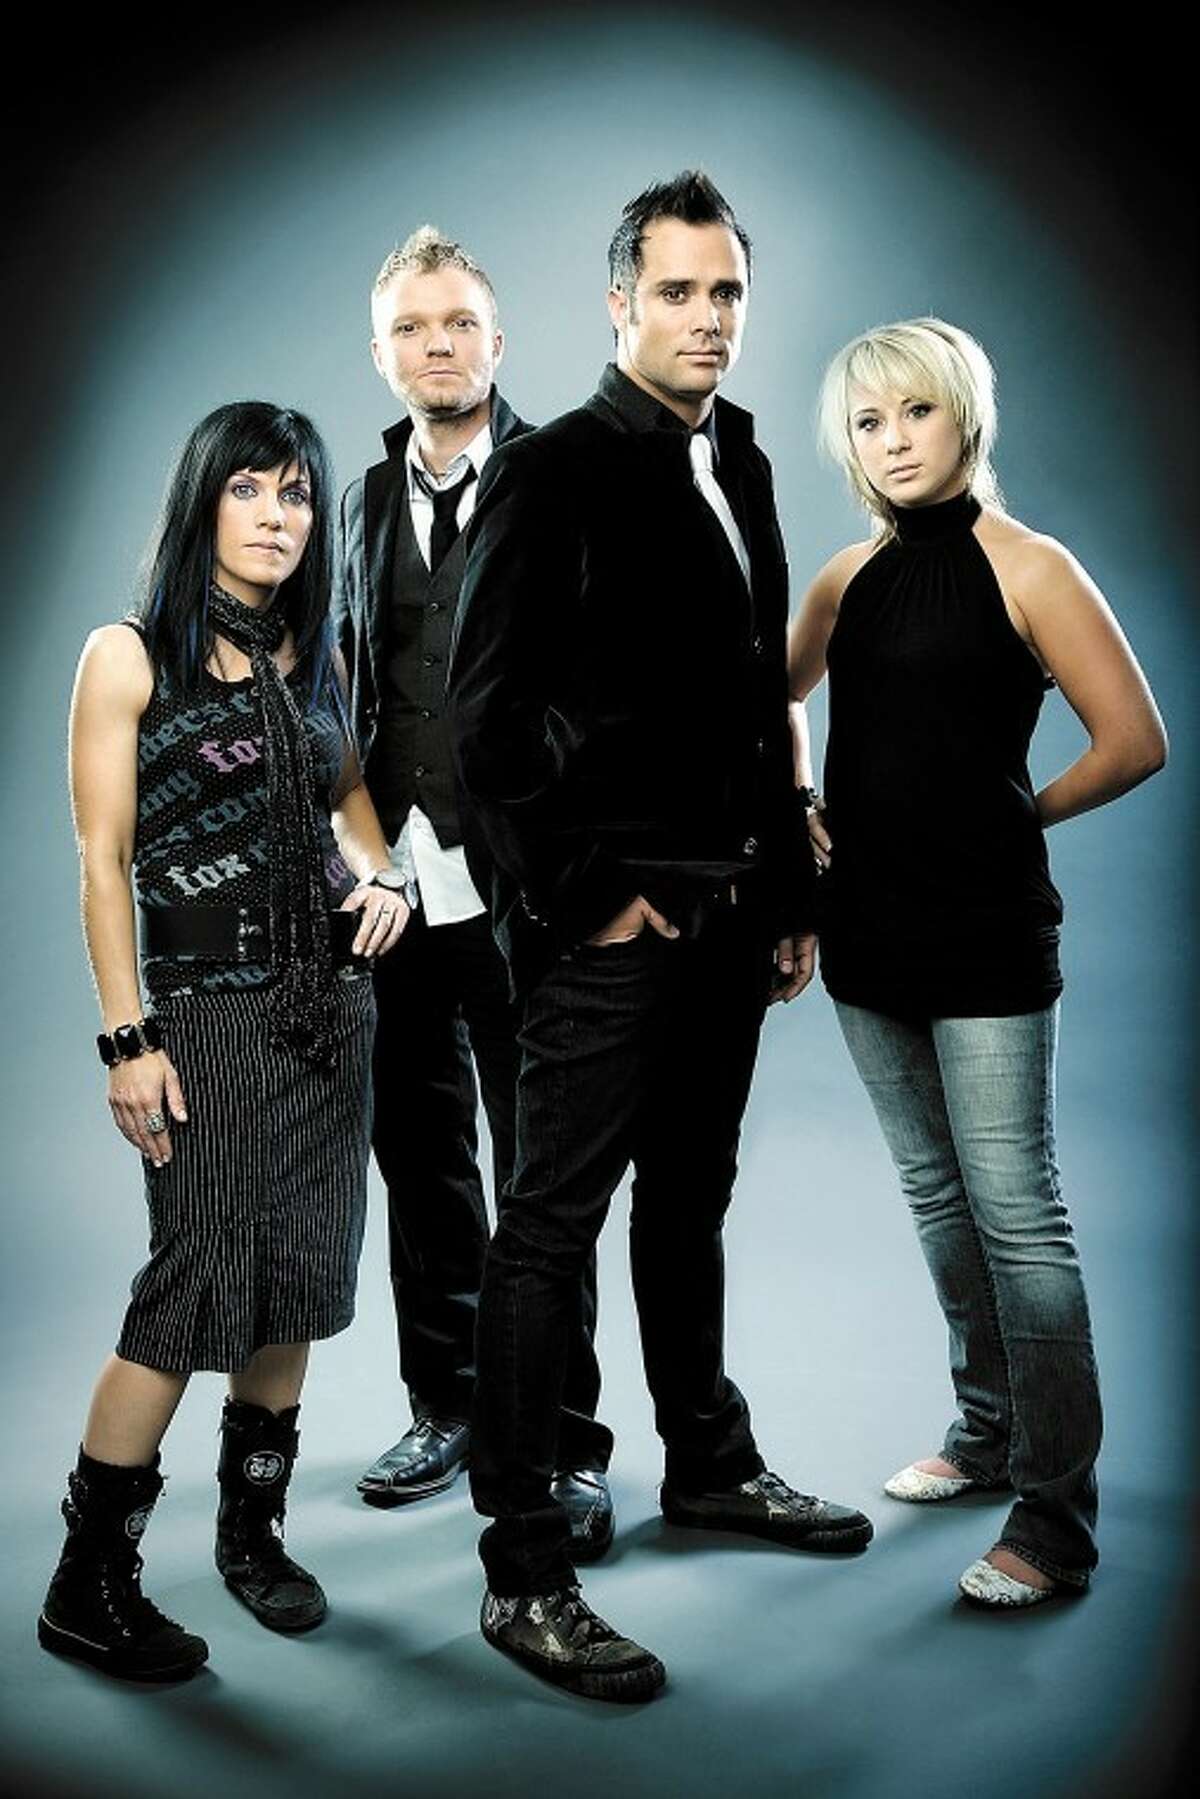 Skillet at Rock the Desert Band’s secular success doesn’t blur mission